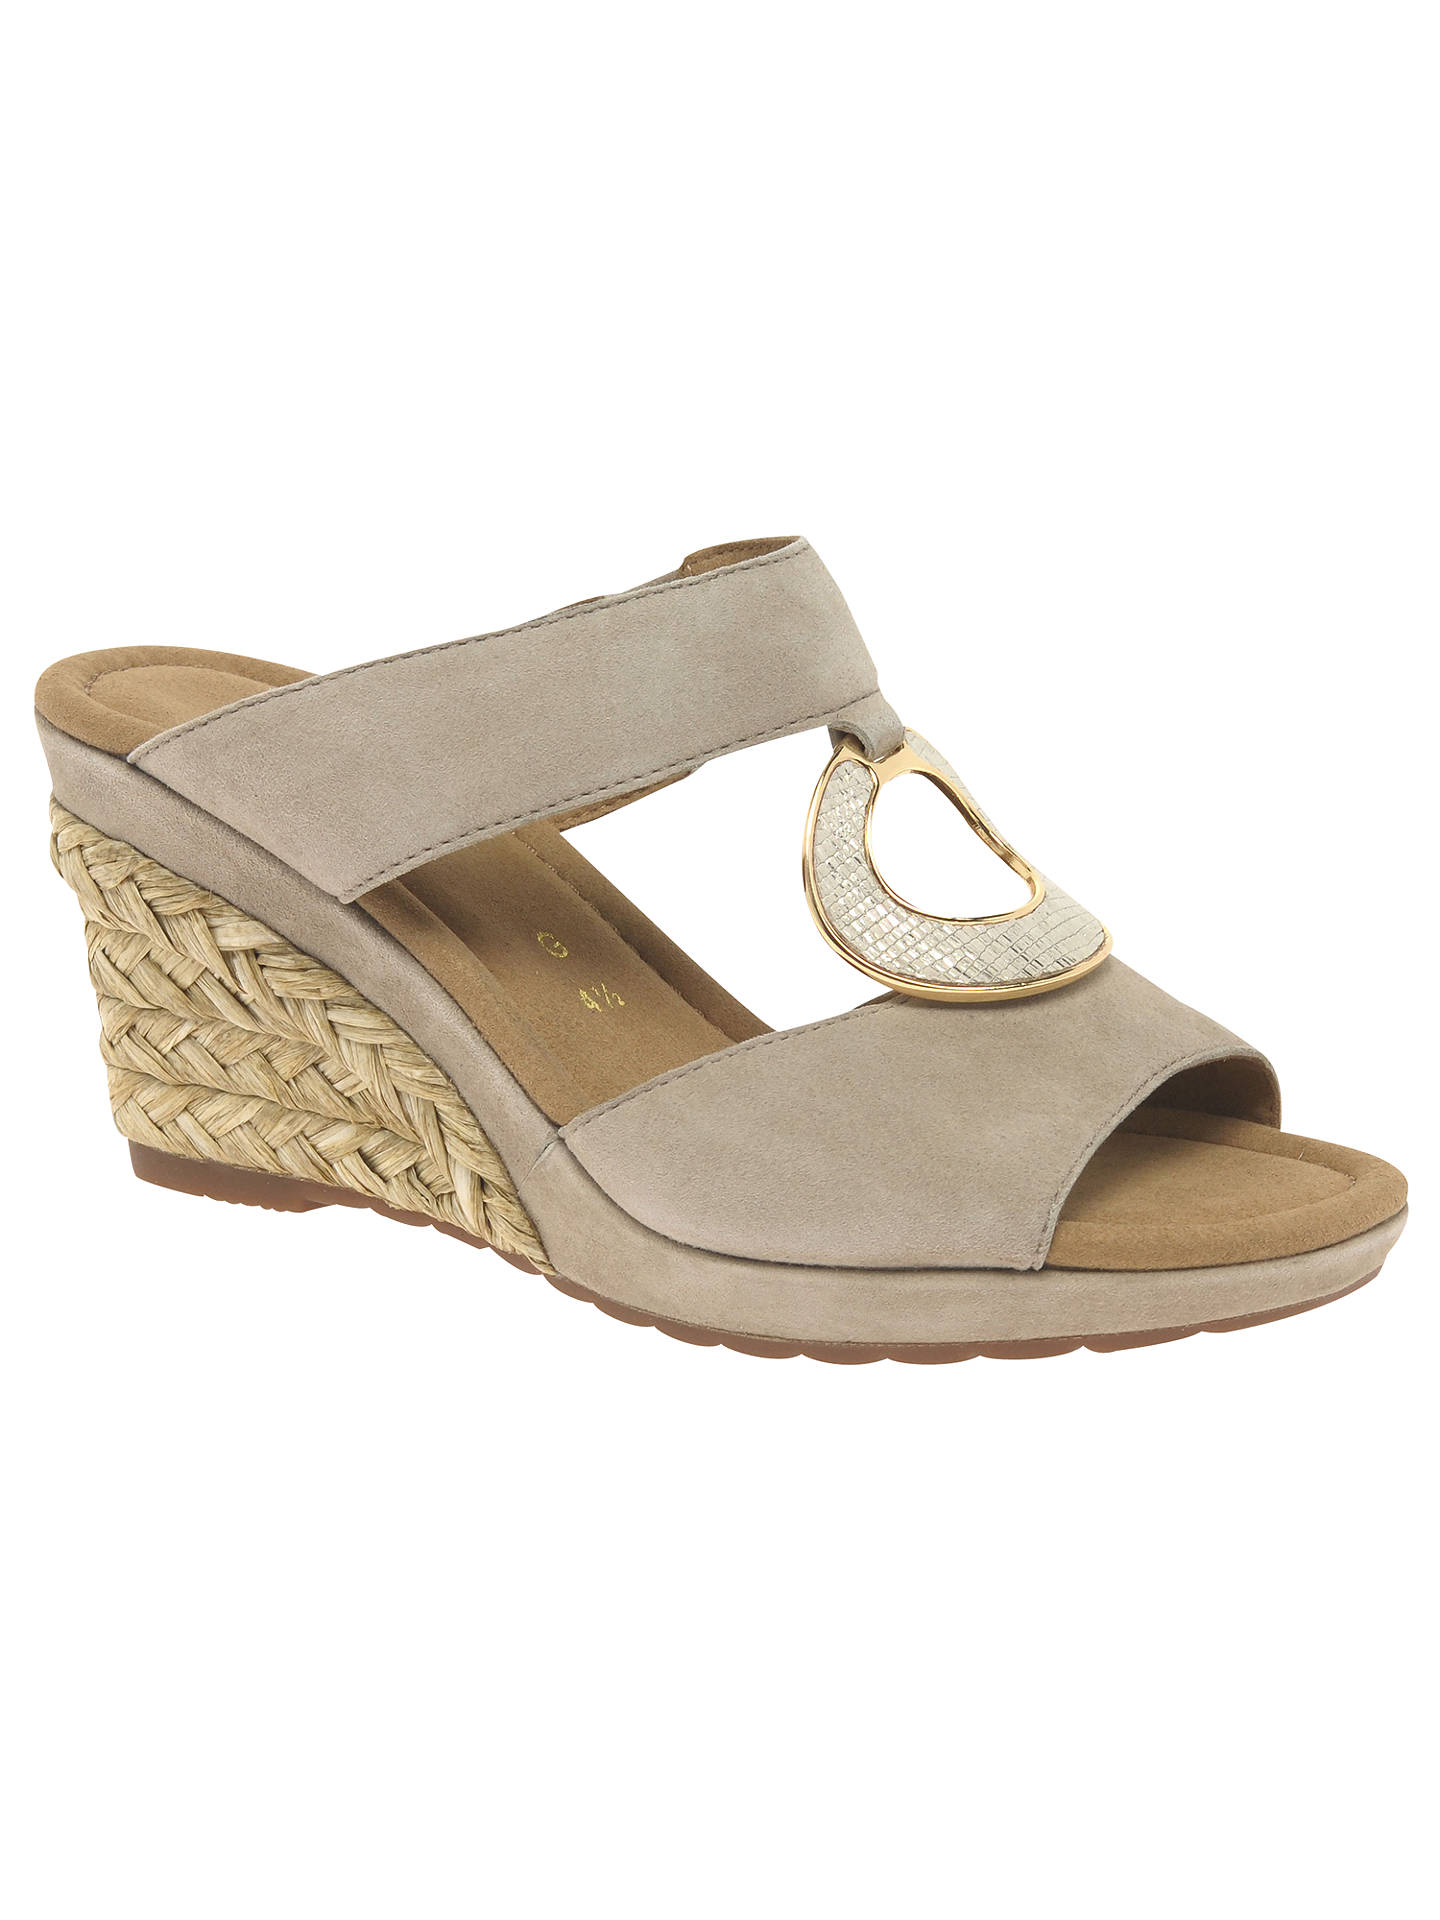 Gabor Sizzle Wide Fit Wedge Heeled Sandals, Beige at John Lewis & Partners